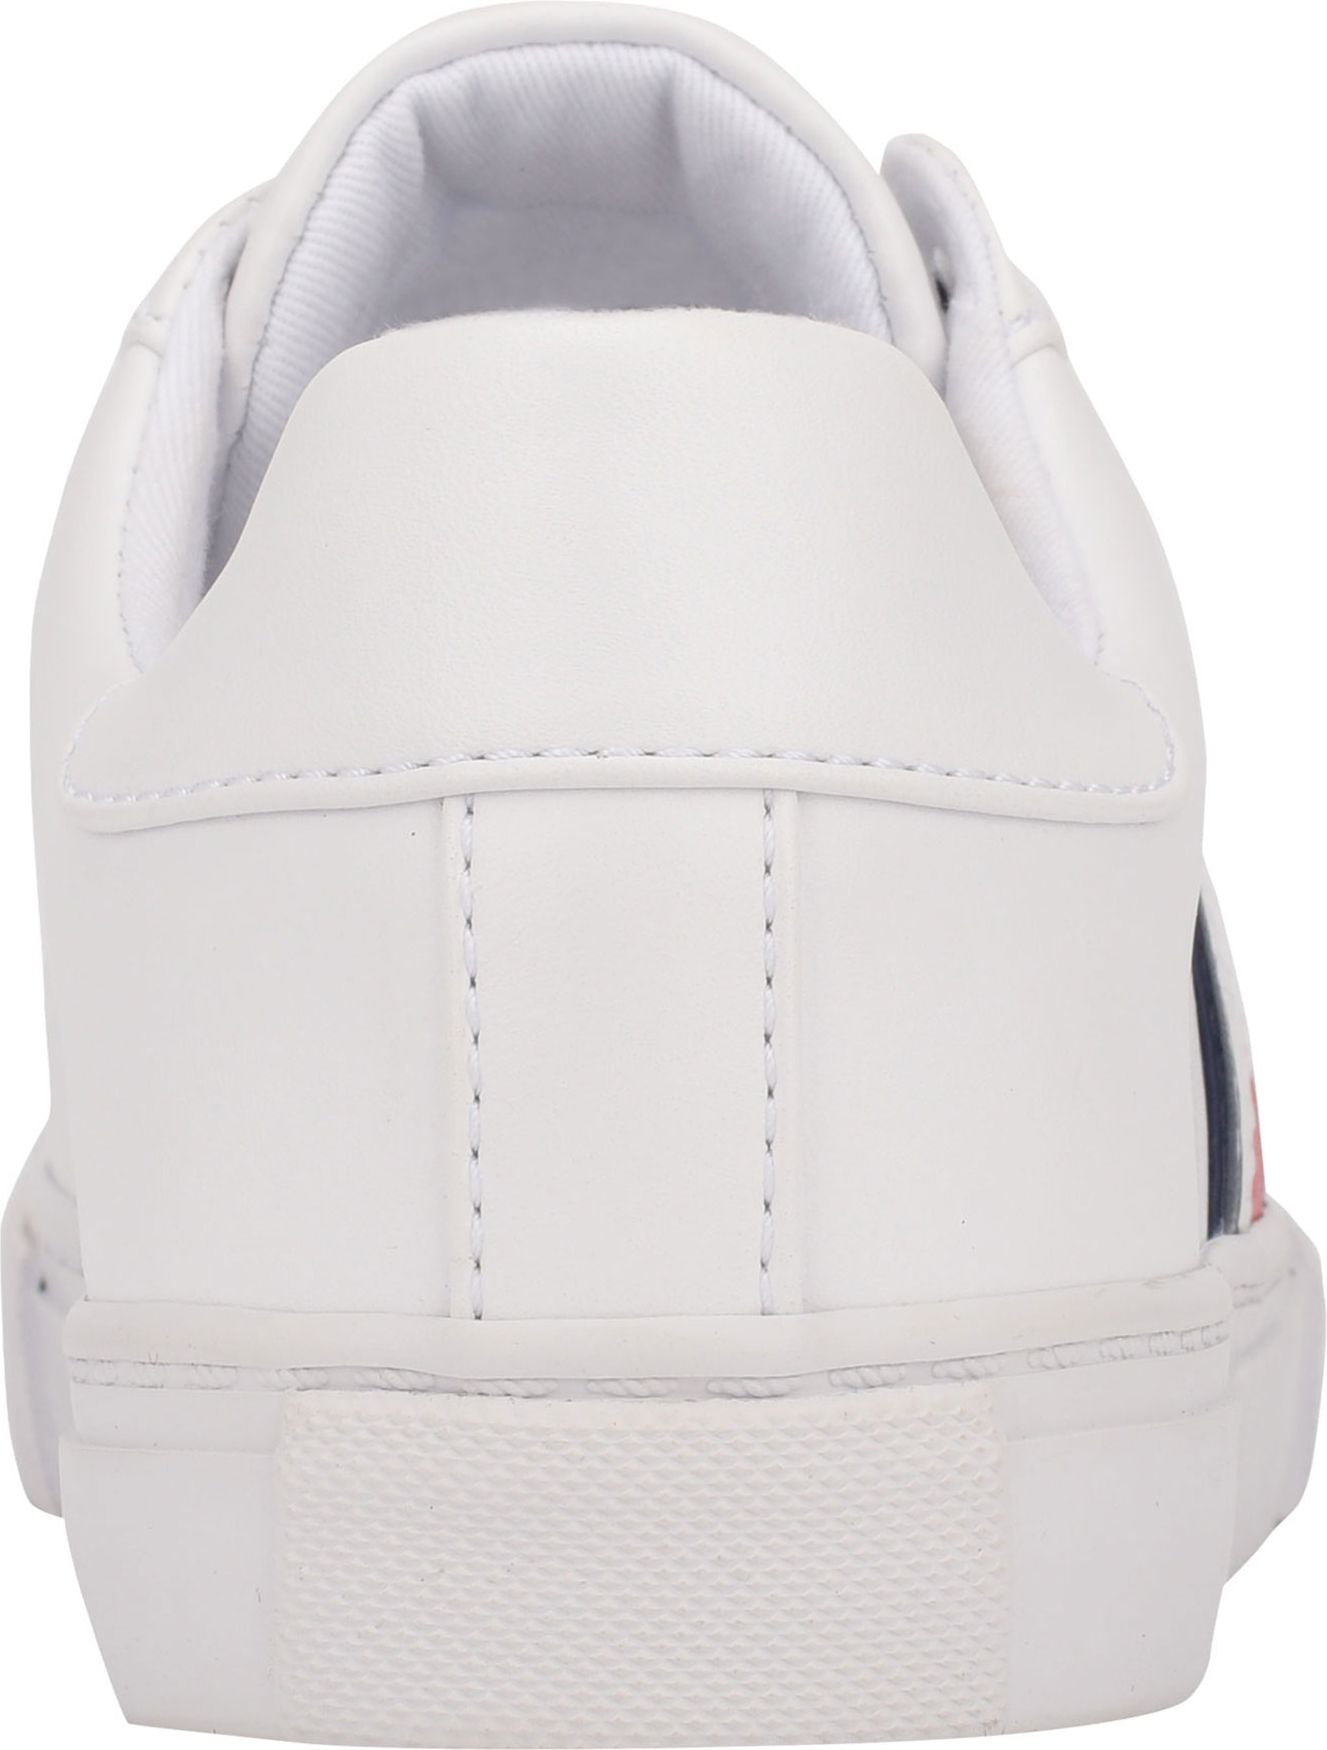 Tommy Hilfiger Shoes Lawson Leather Like White